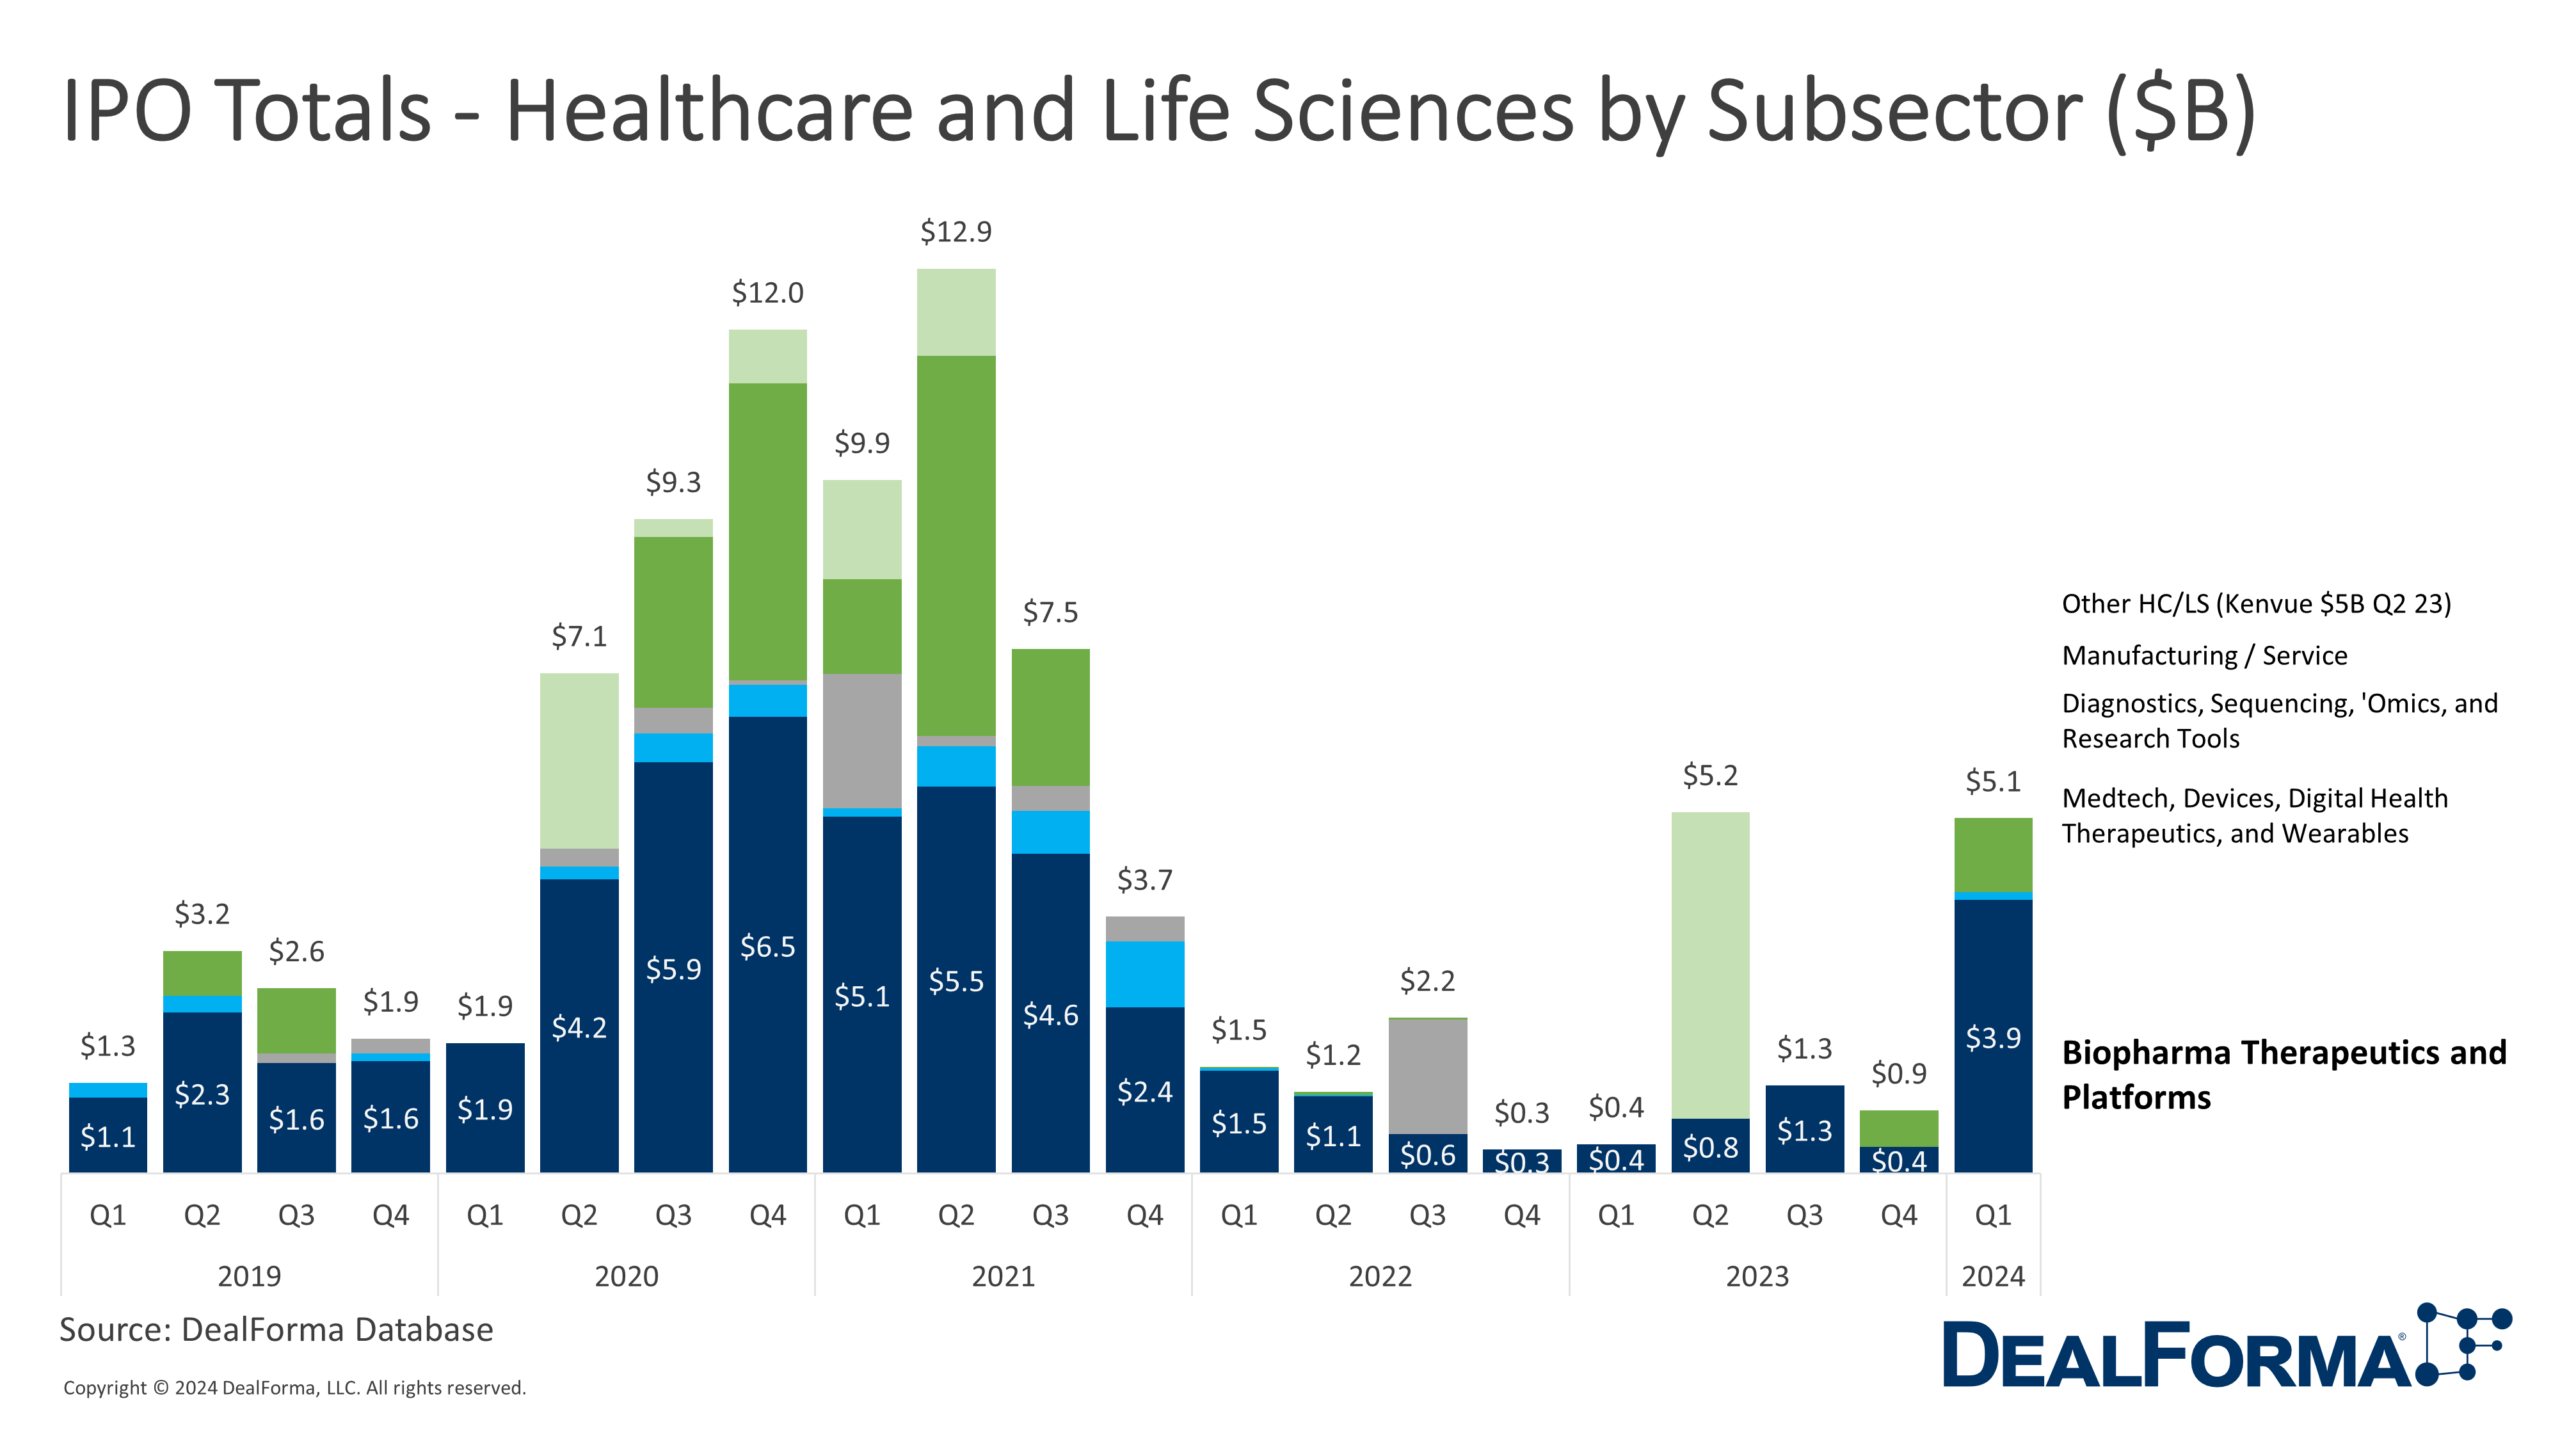 IPO Totals - Healthcare and Life Sciences by Subsector ($B)